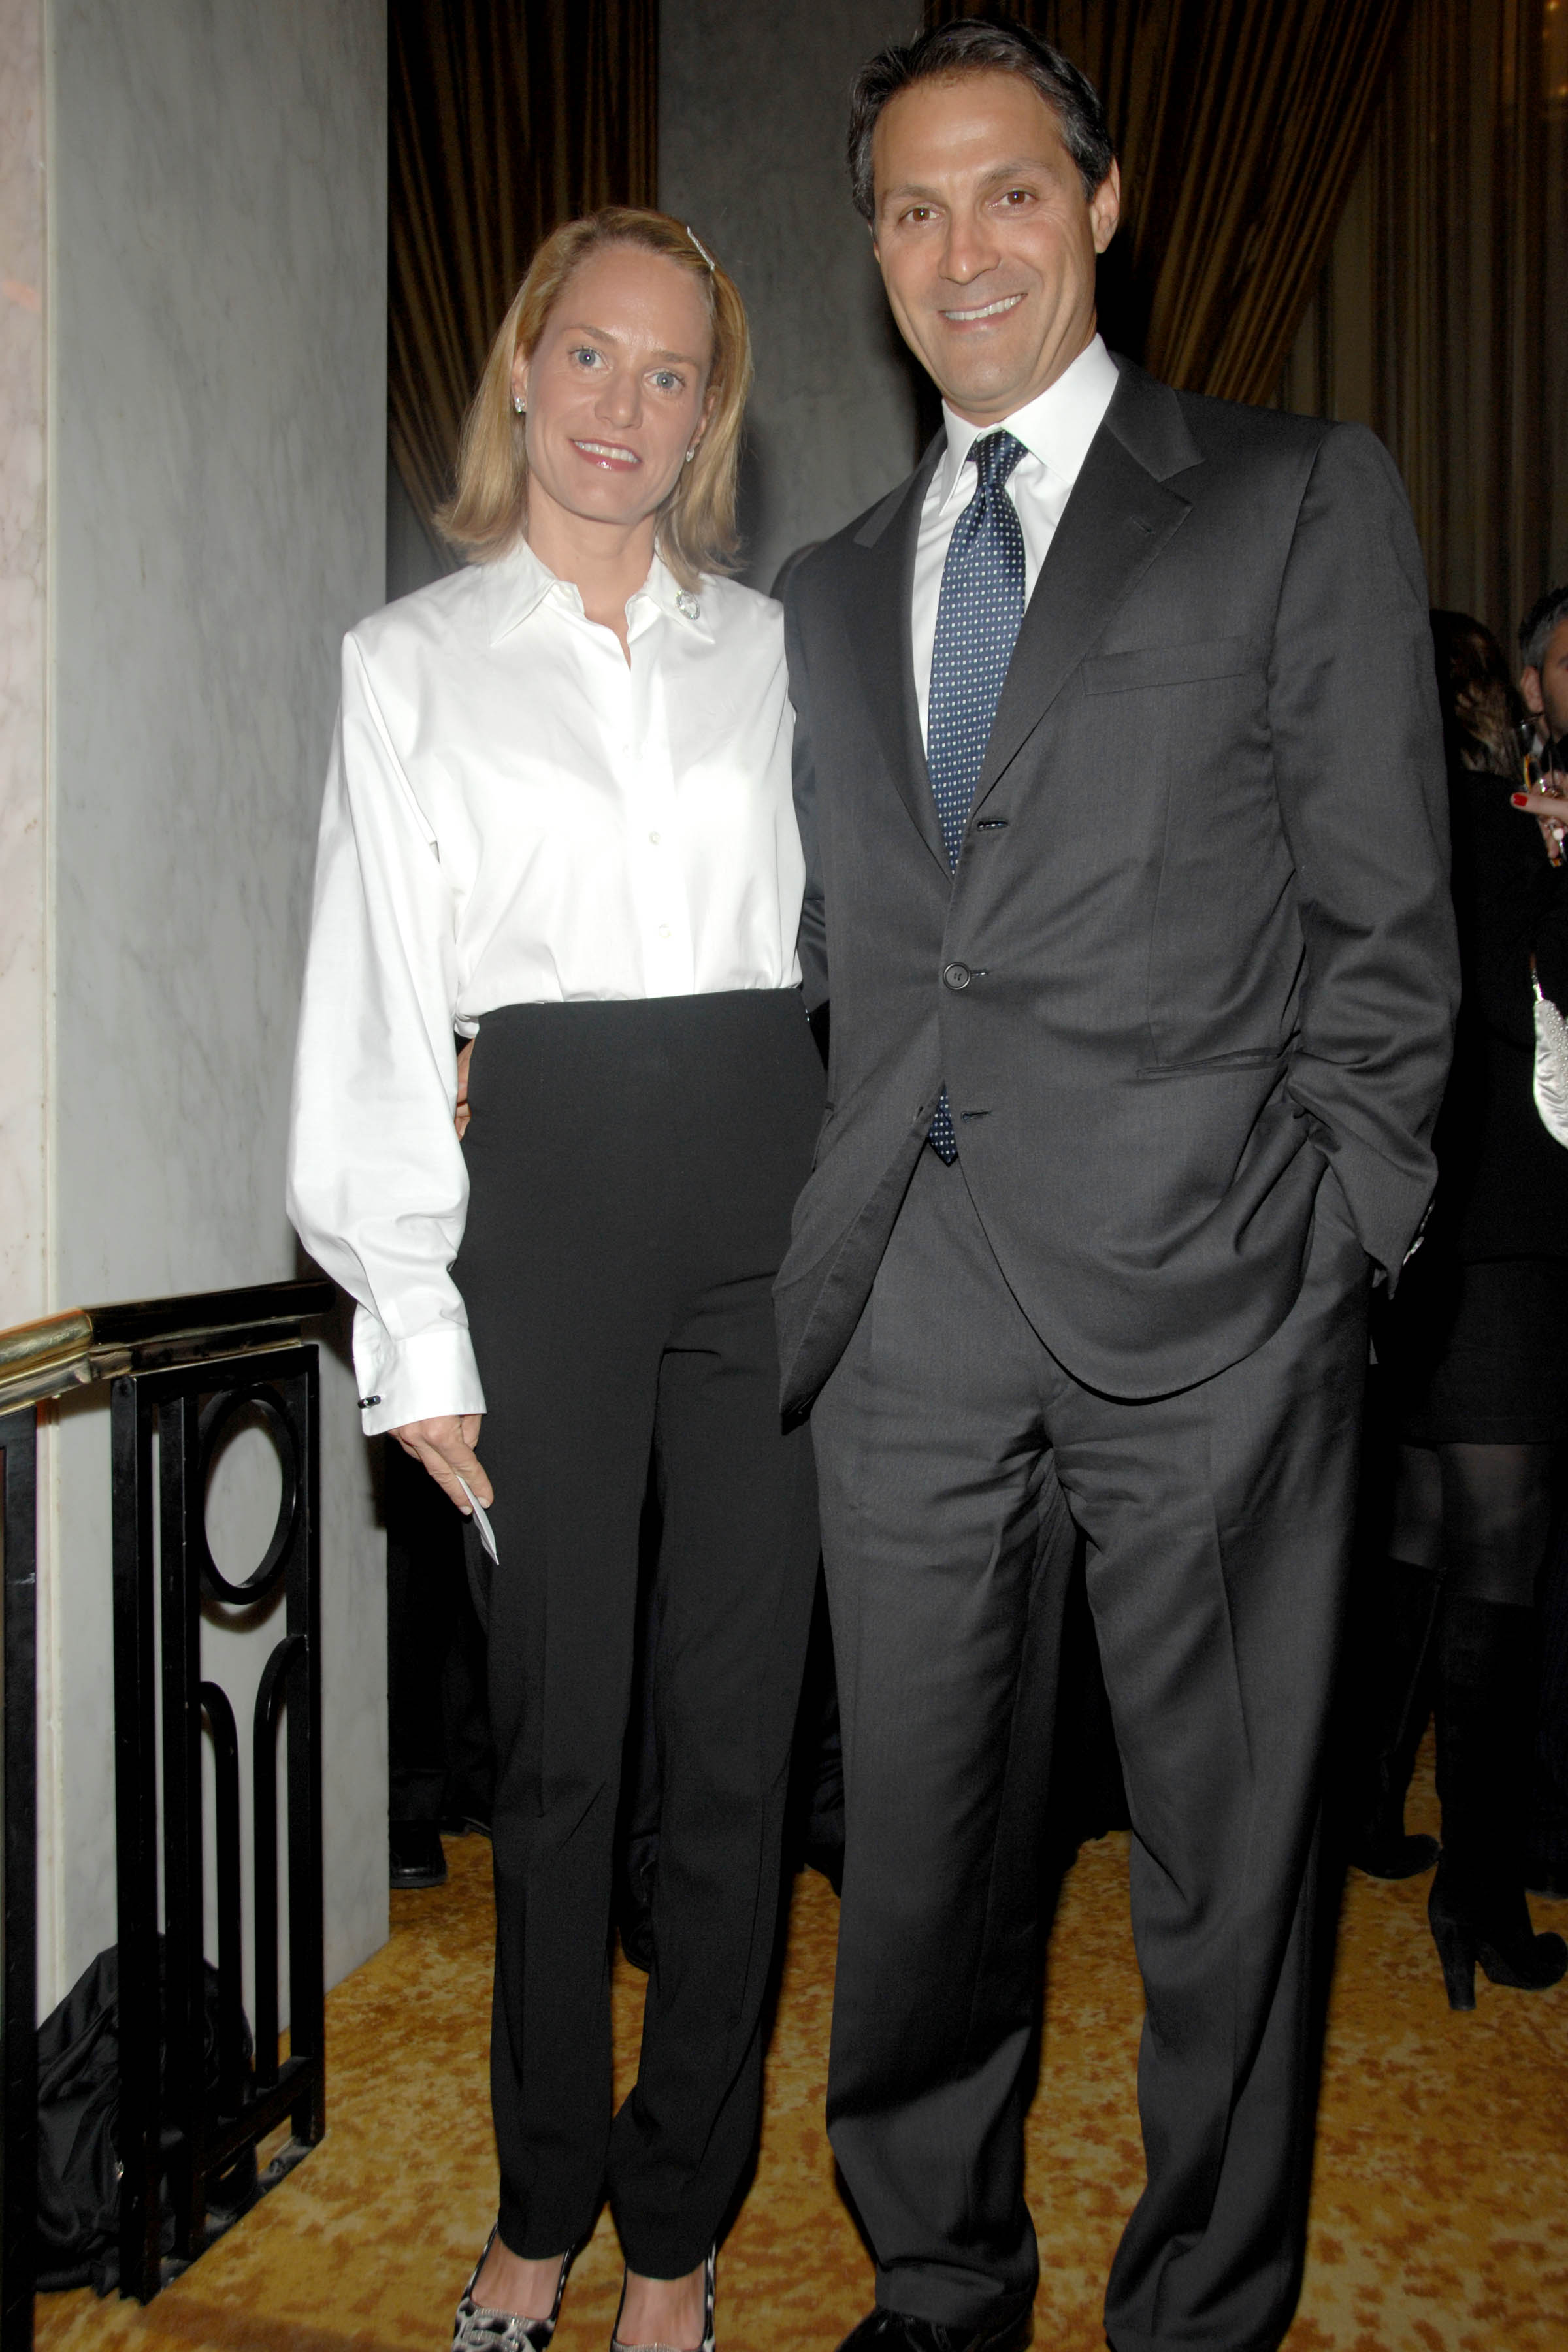 Sarah Addington and Ari Emanuel attend SAKS FIFTH AVENUE'S 'UNFORGETTABLE EVENING' Benefiting Entertainment Industry Foundation's (EIF) Women's Cancer Research Fund at Beverly Wilshire Hotel on February 20, 2008, in Beverly Hills, California. | Source: Getty Images